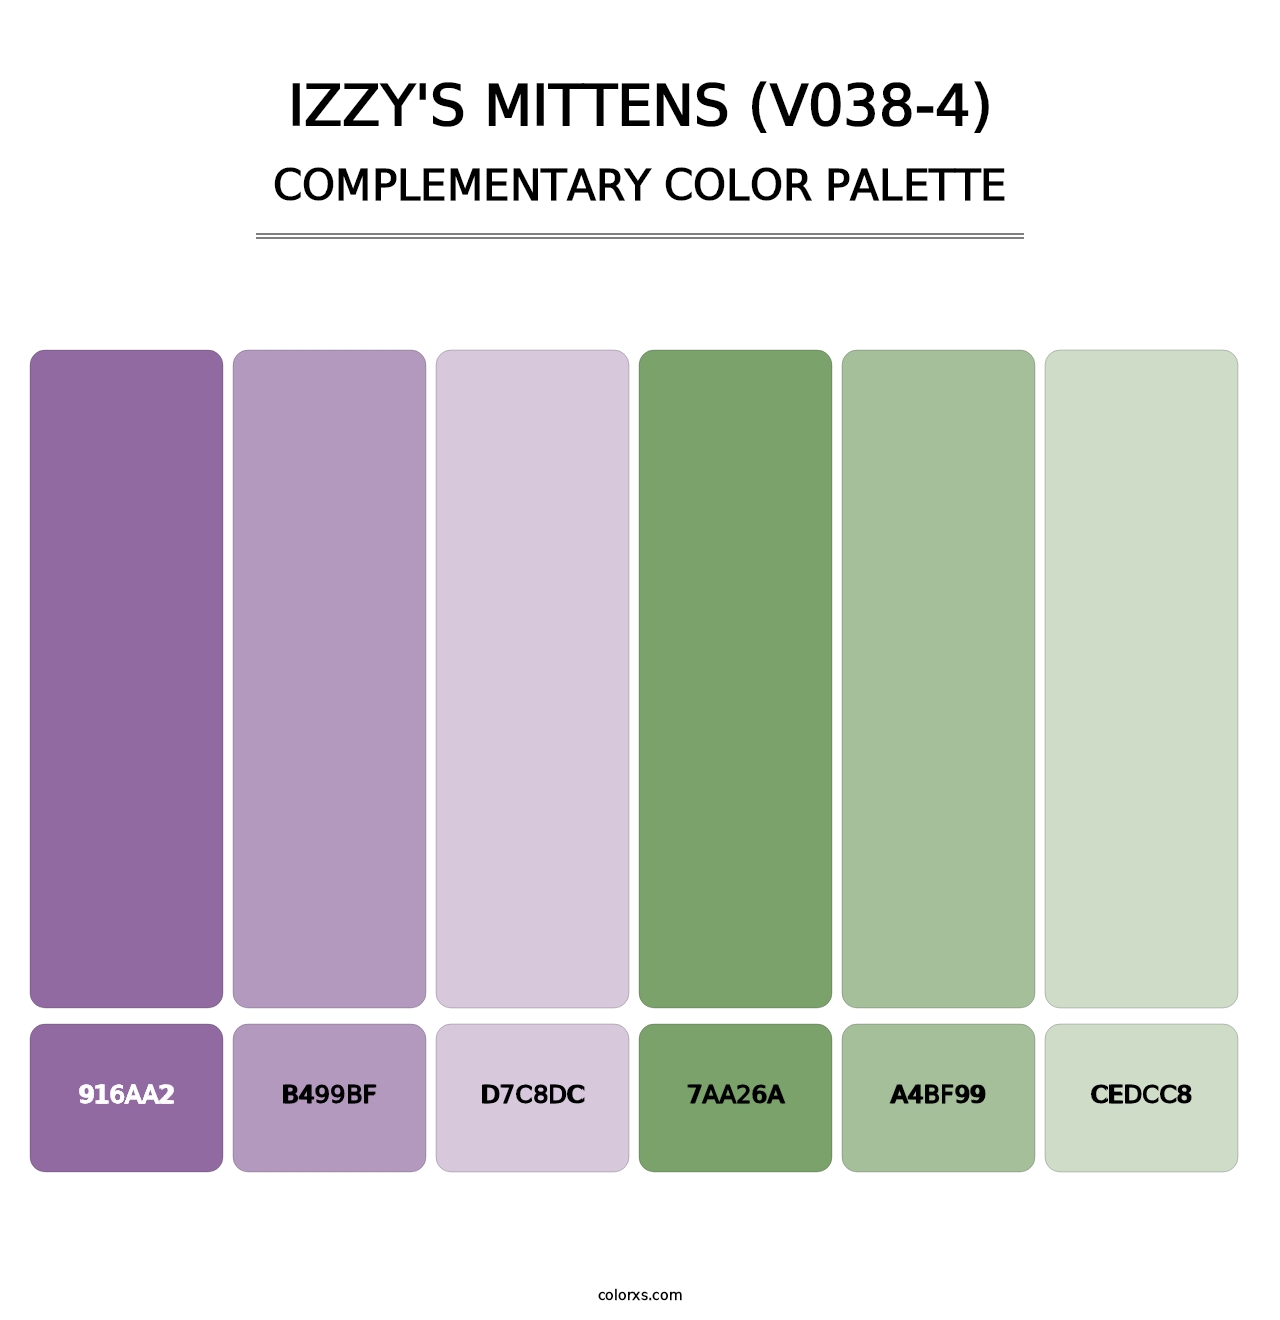 Izzy's Mittens (V038-4) - Complementary Color Palette